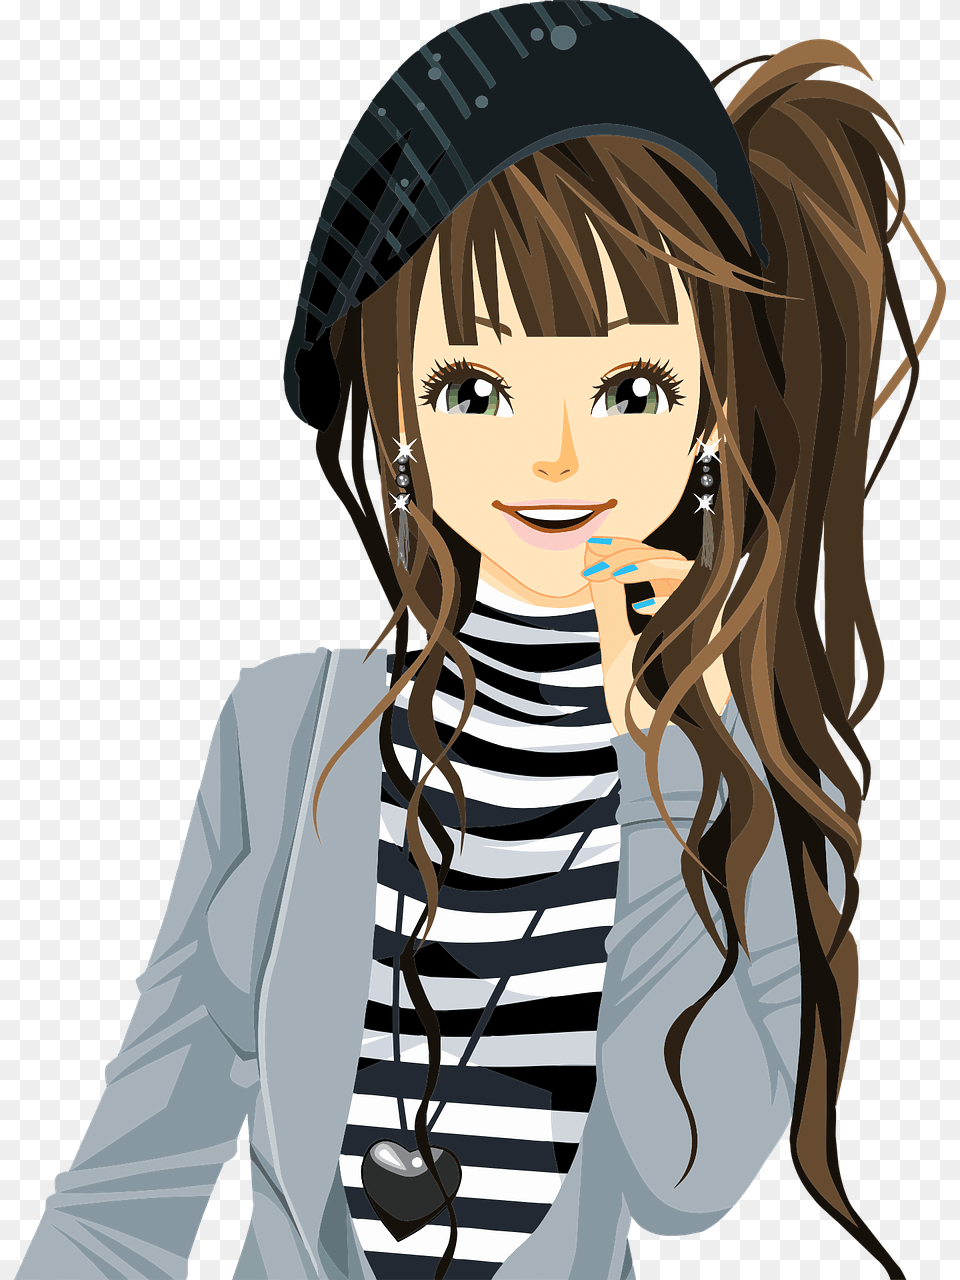 Girl Hair Model Free Vector Graphic On Pixabay Girl, Book, Comics, Publication, Adult Png Image